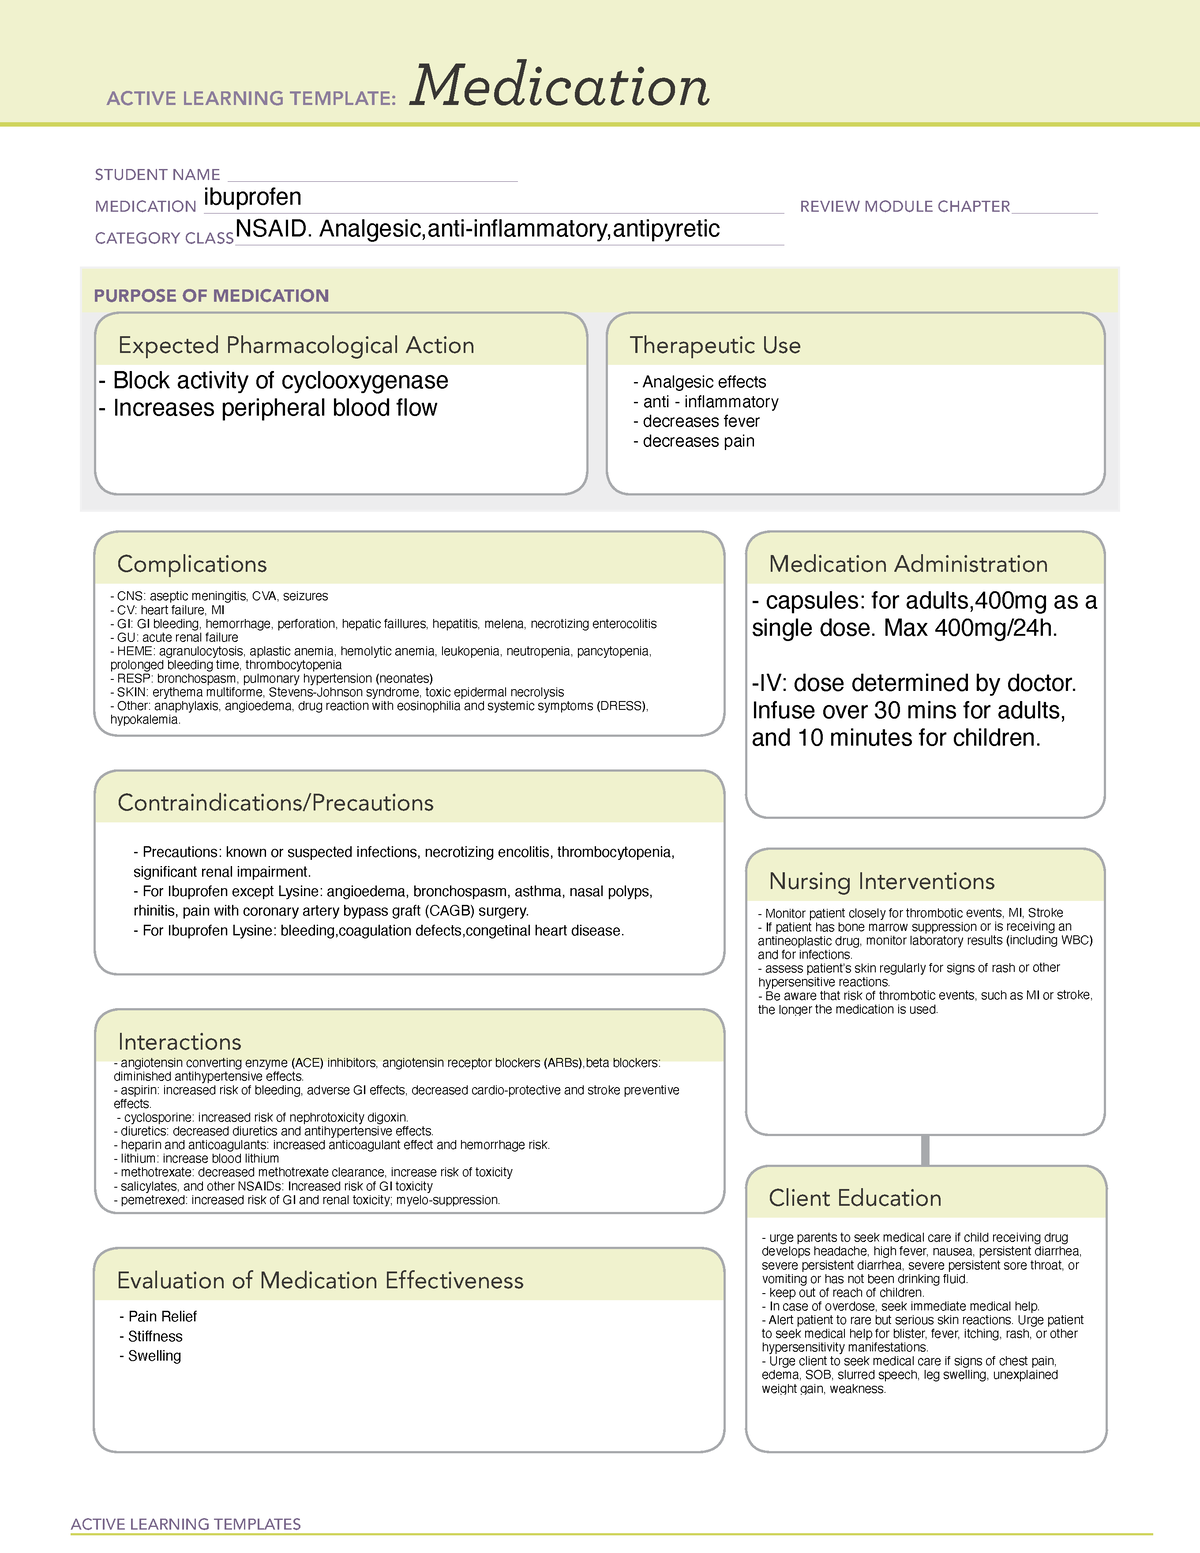 Ibuprofen ATI med templates done by the book ACTIVE LEARNING